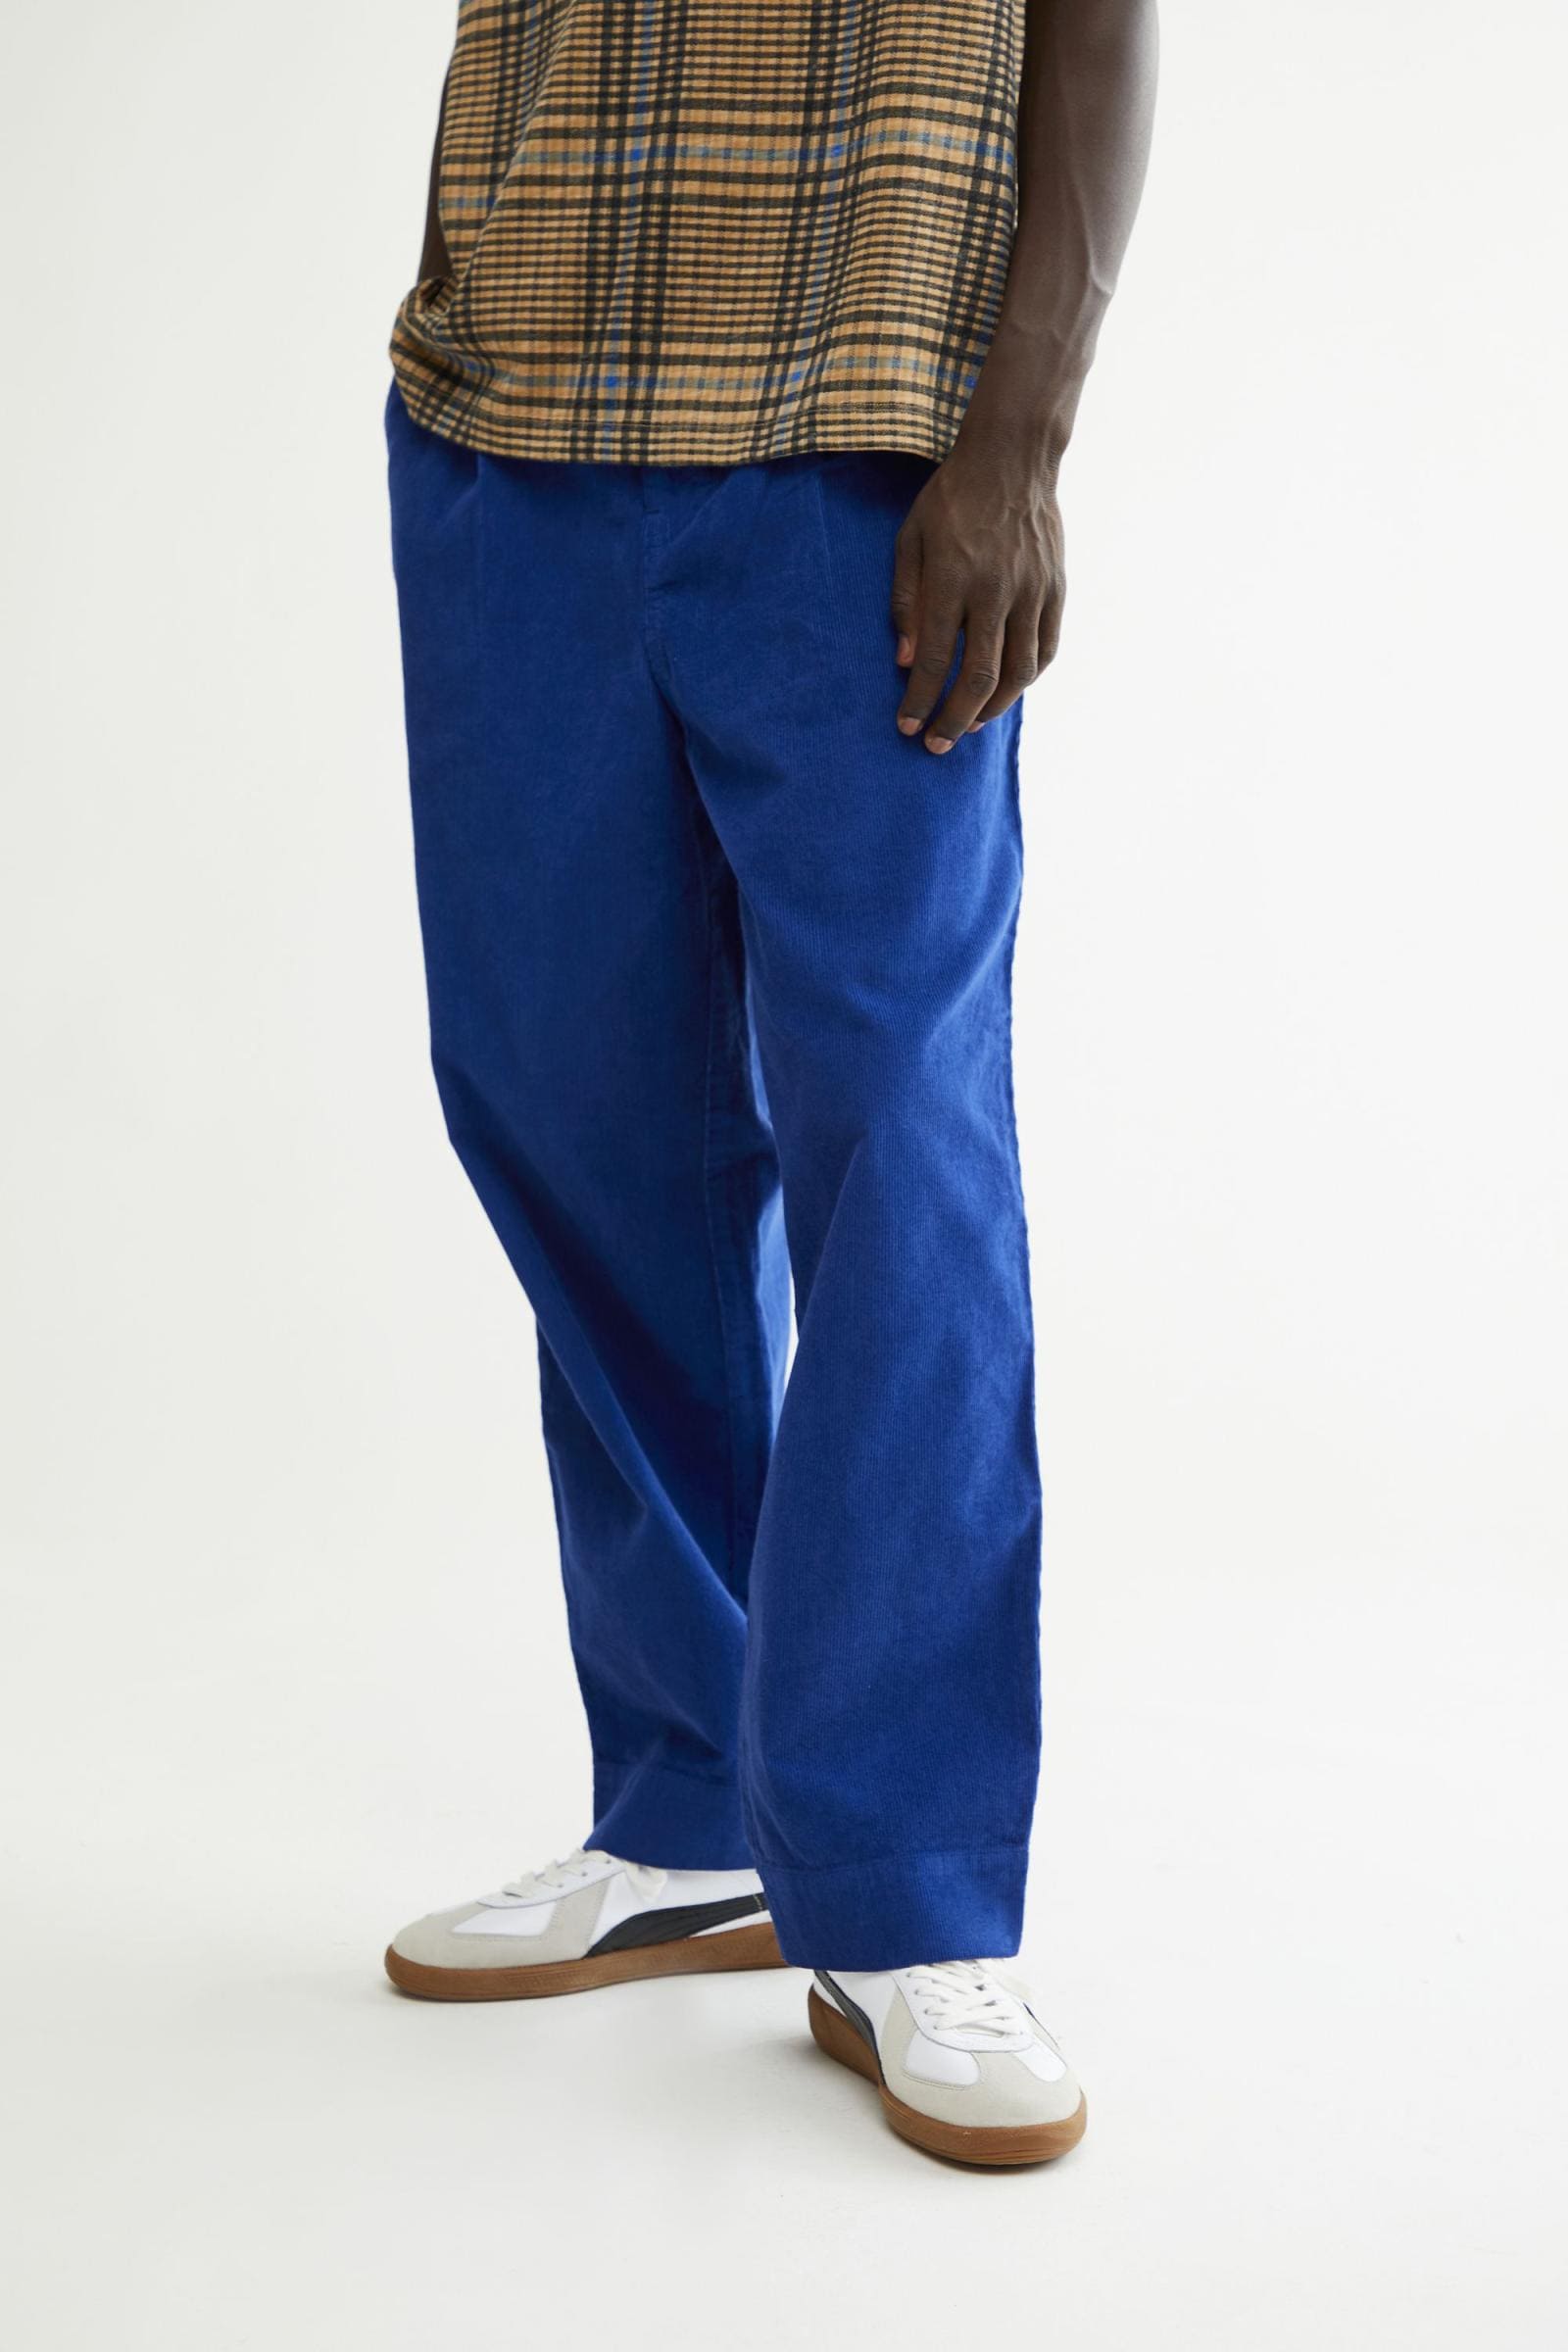 UO Exclusive Henry Pleated Cord Pant